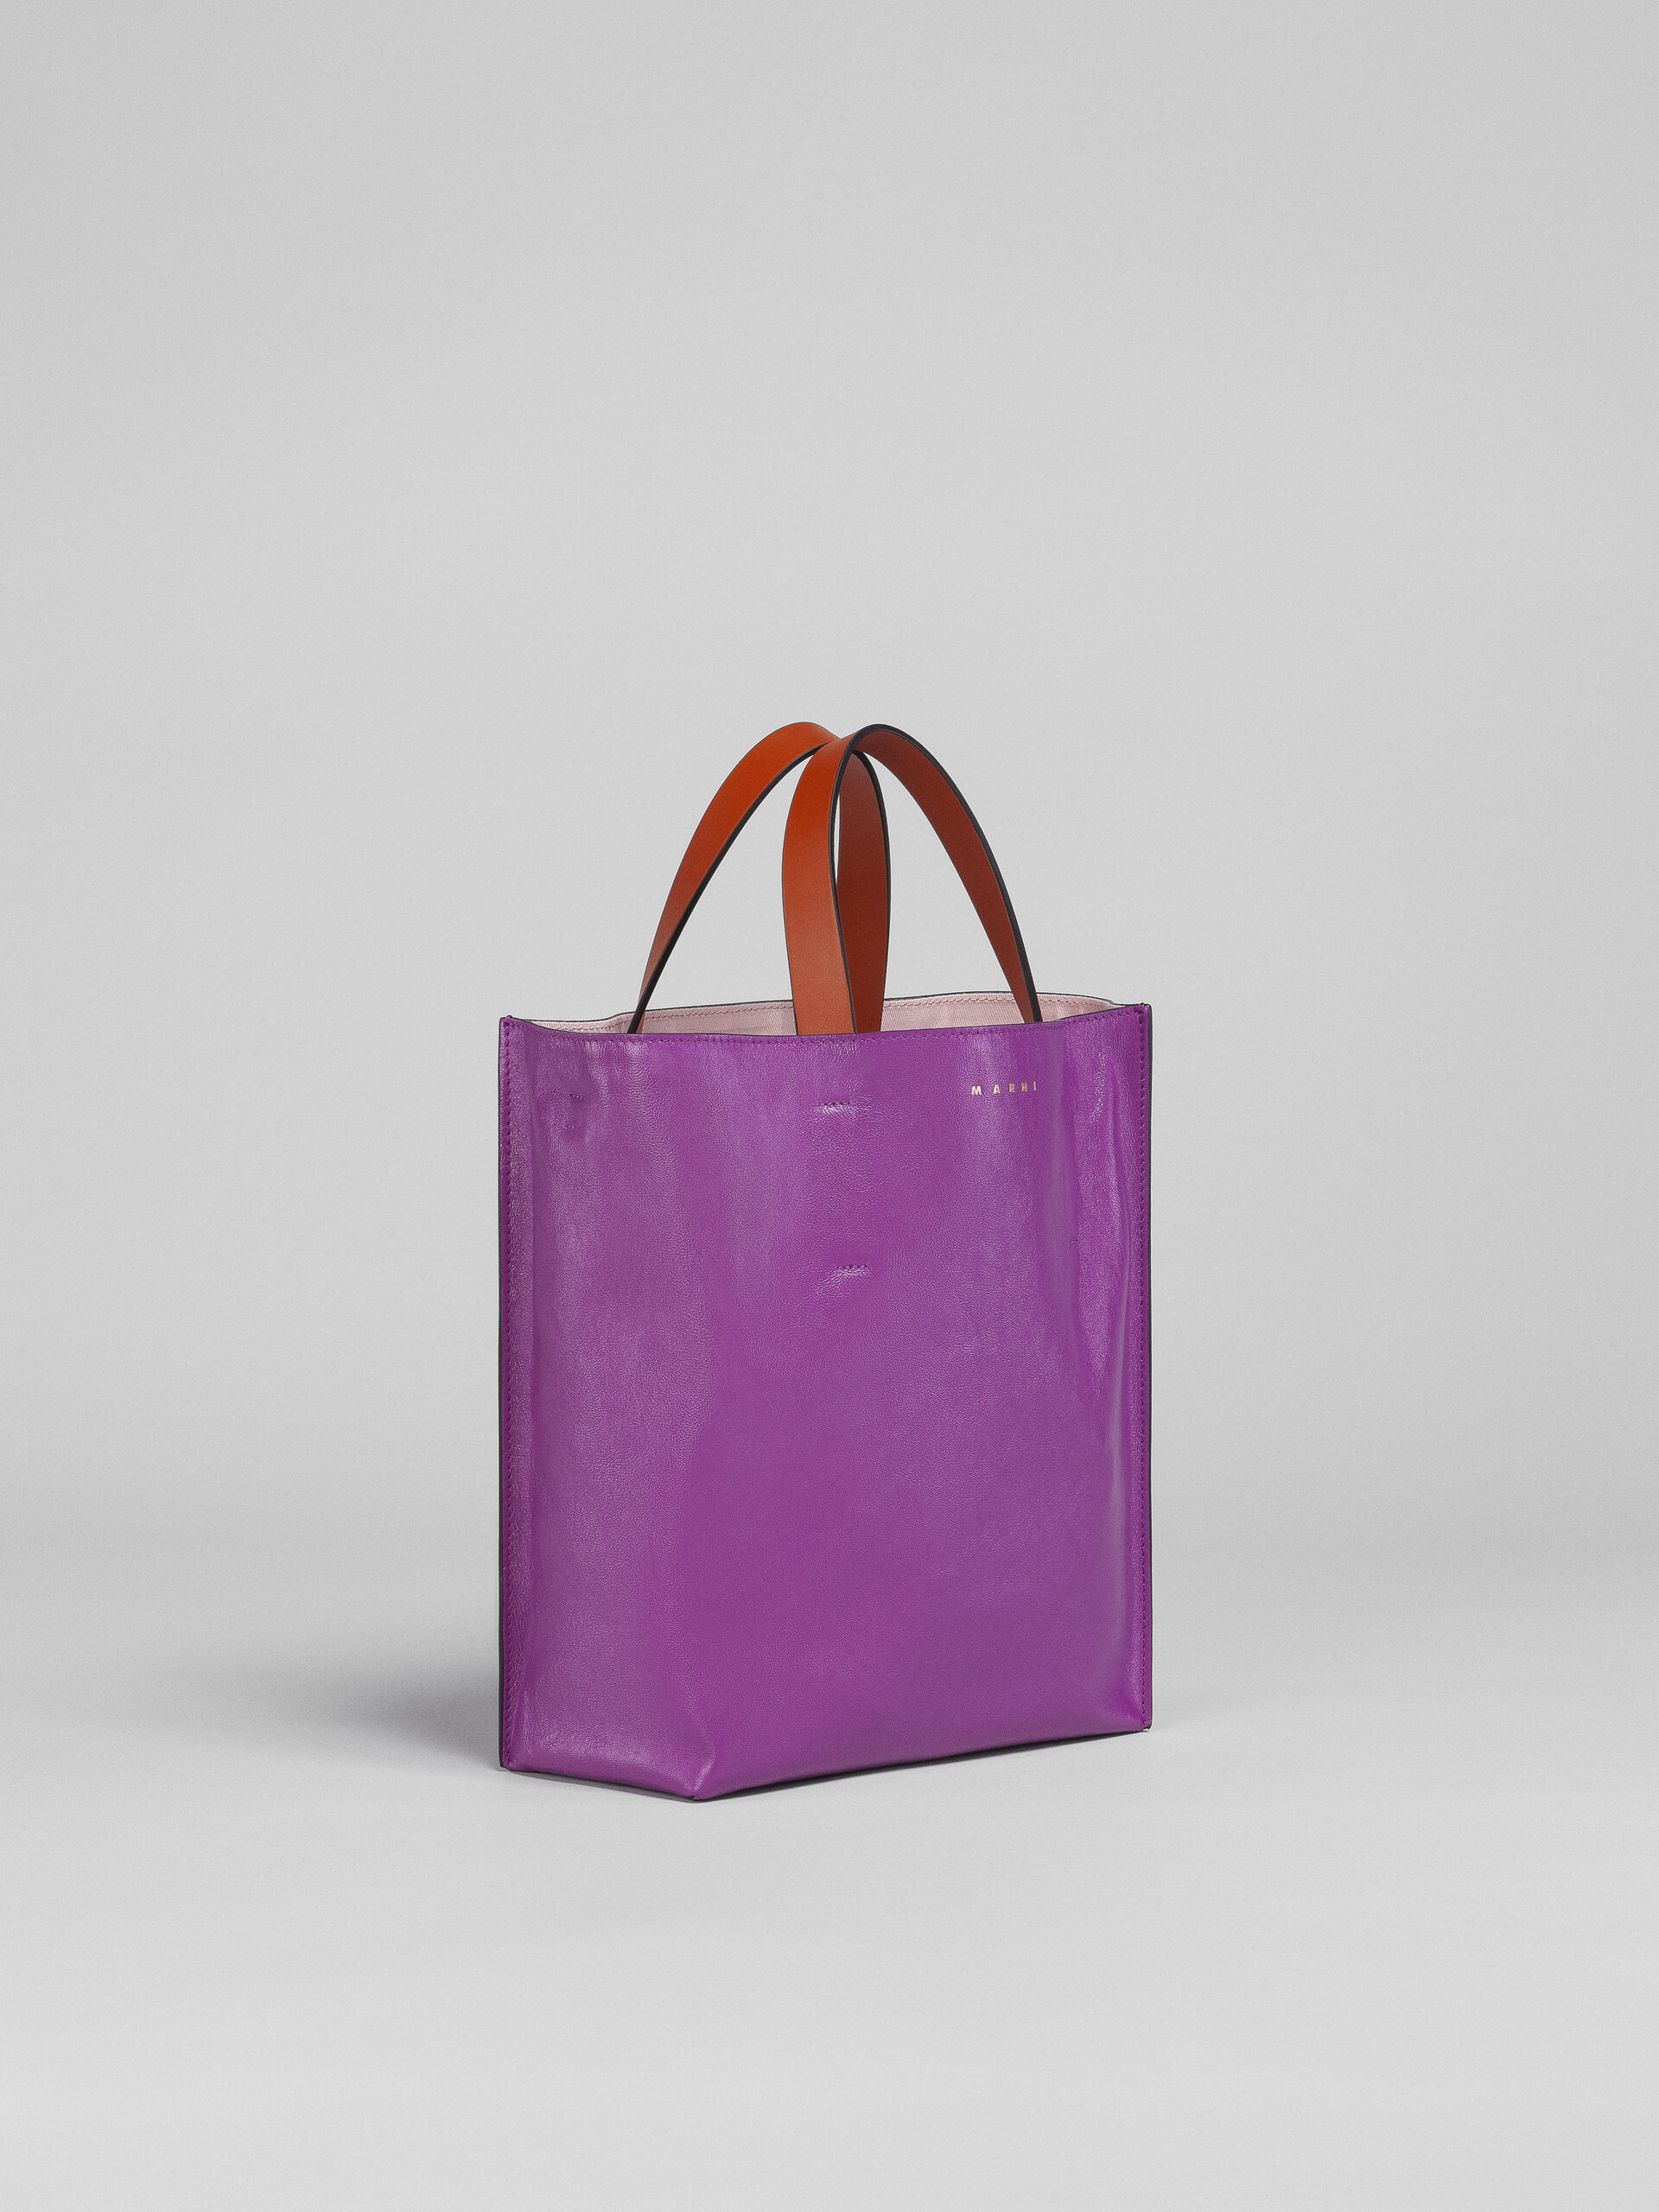 Pink green red tumbled leather MUSEO SOFT bag - Shopping Bags - Image 6